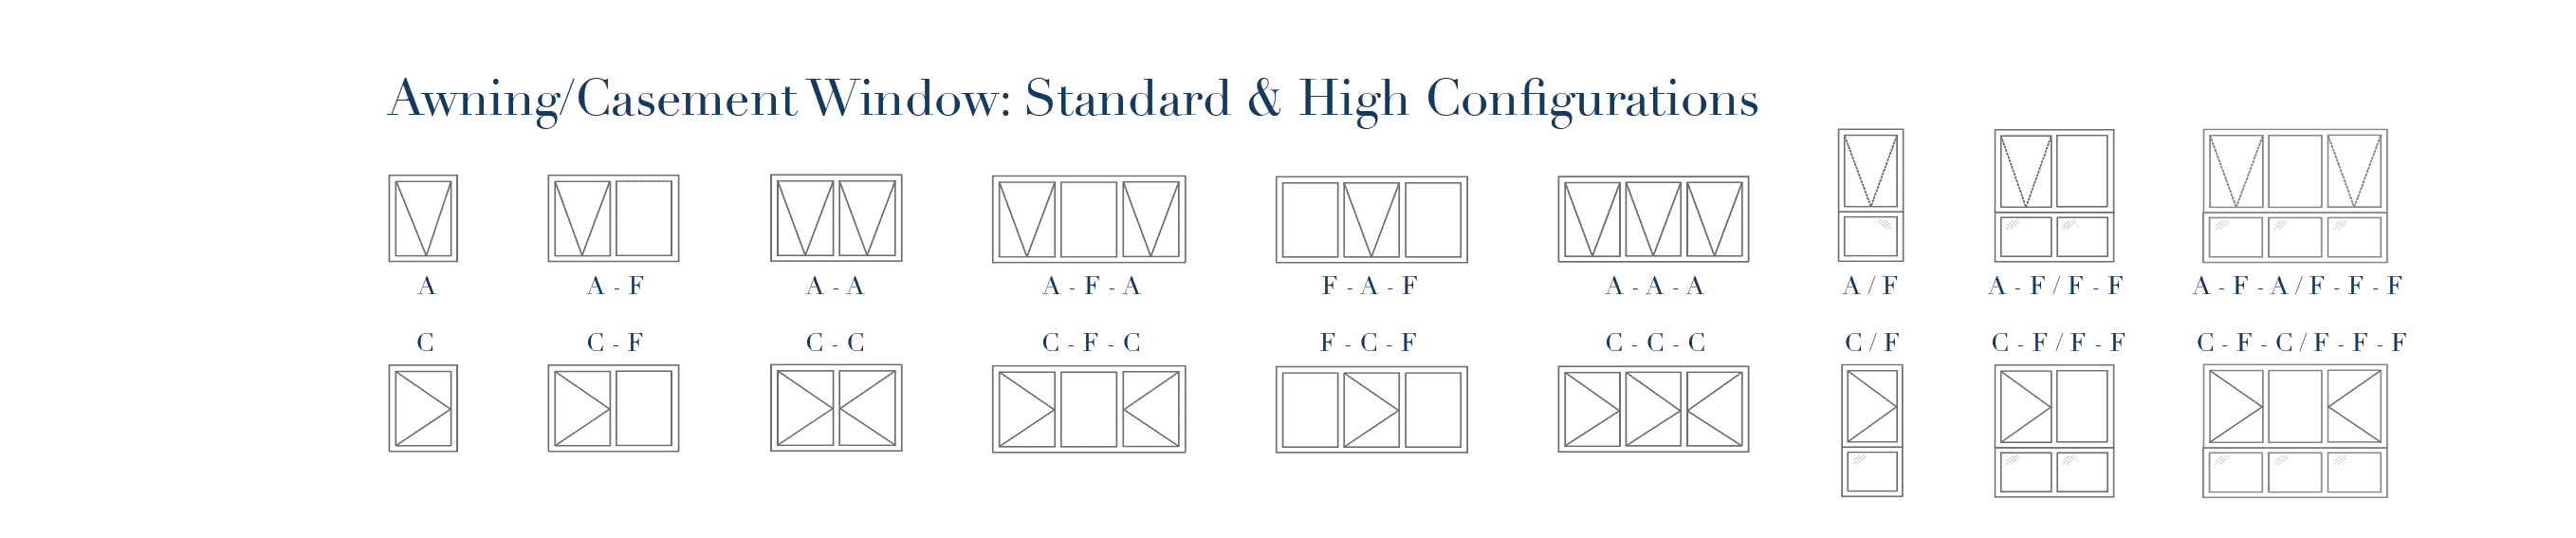 image presents Awning Casement Window Configurations